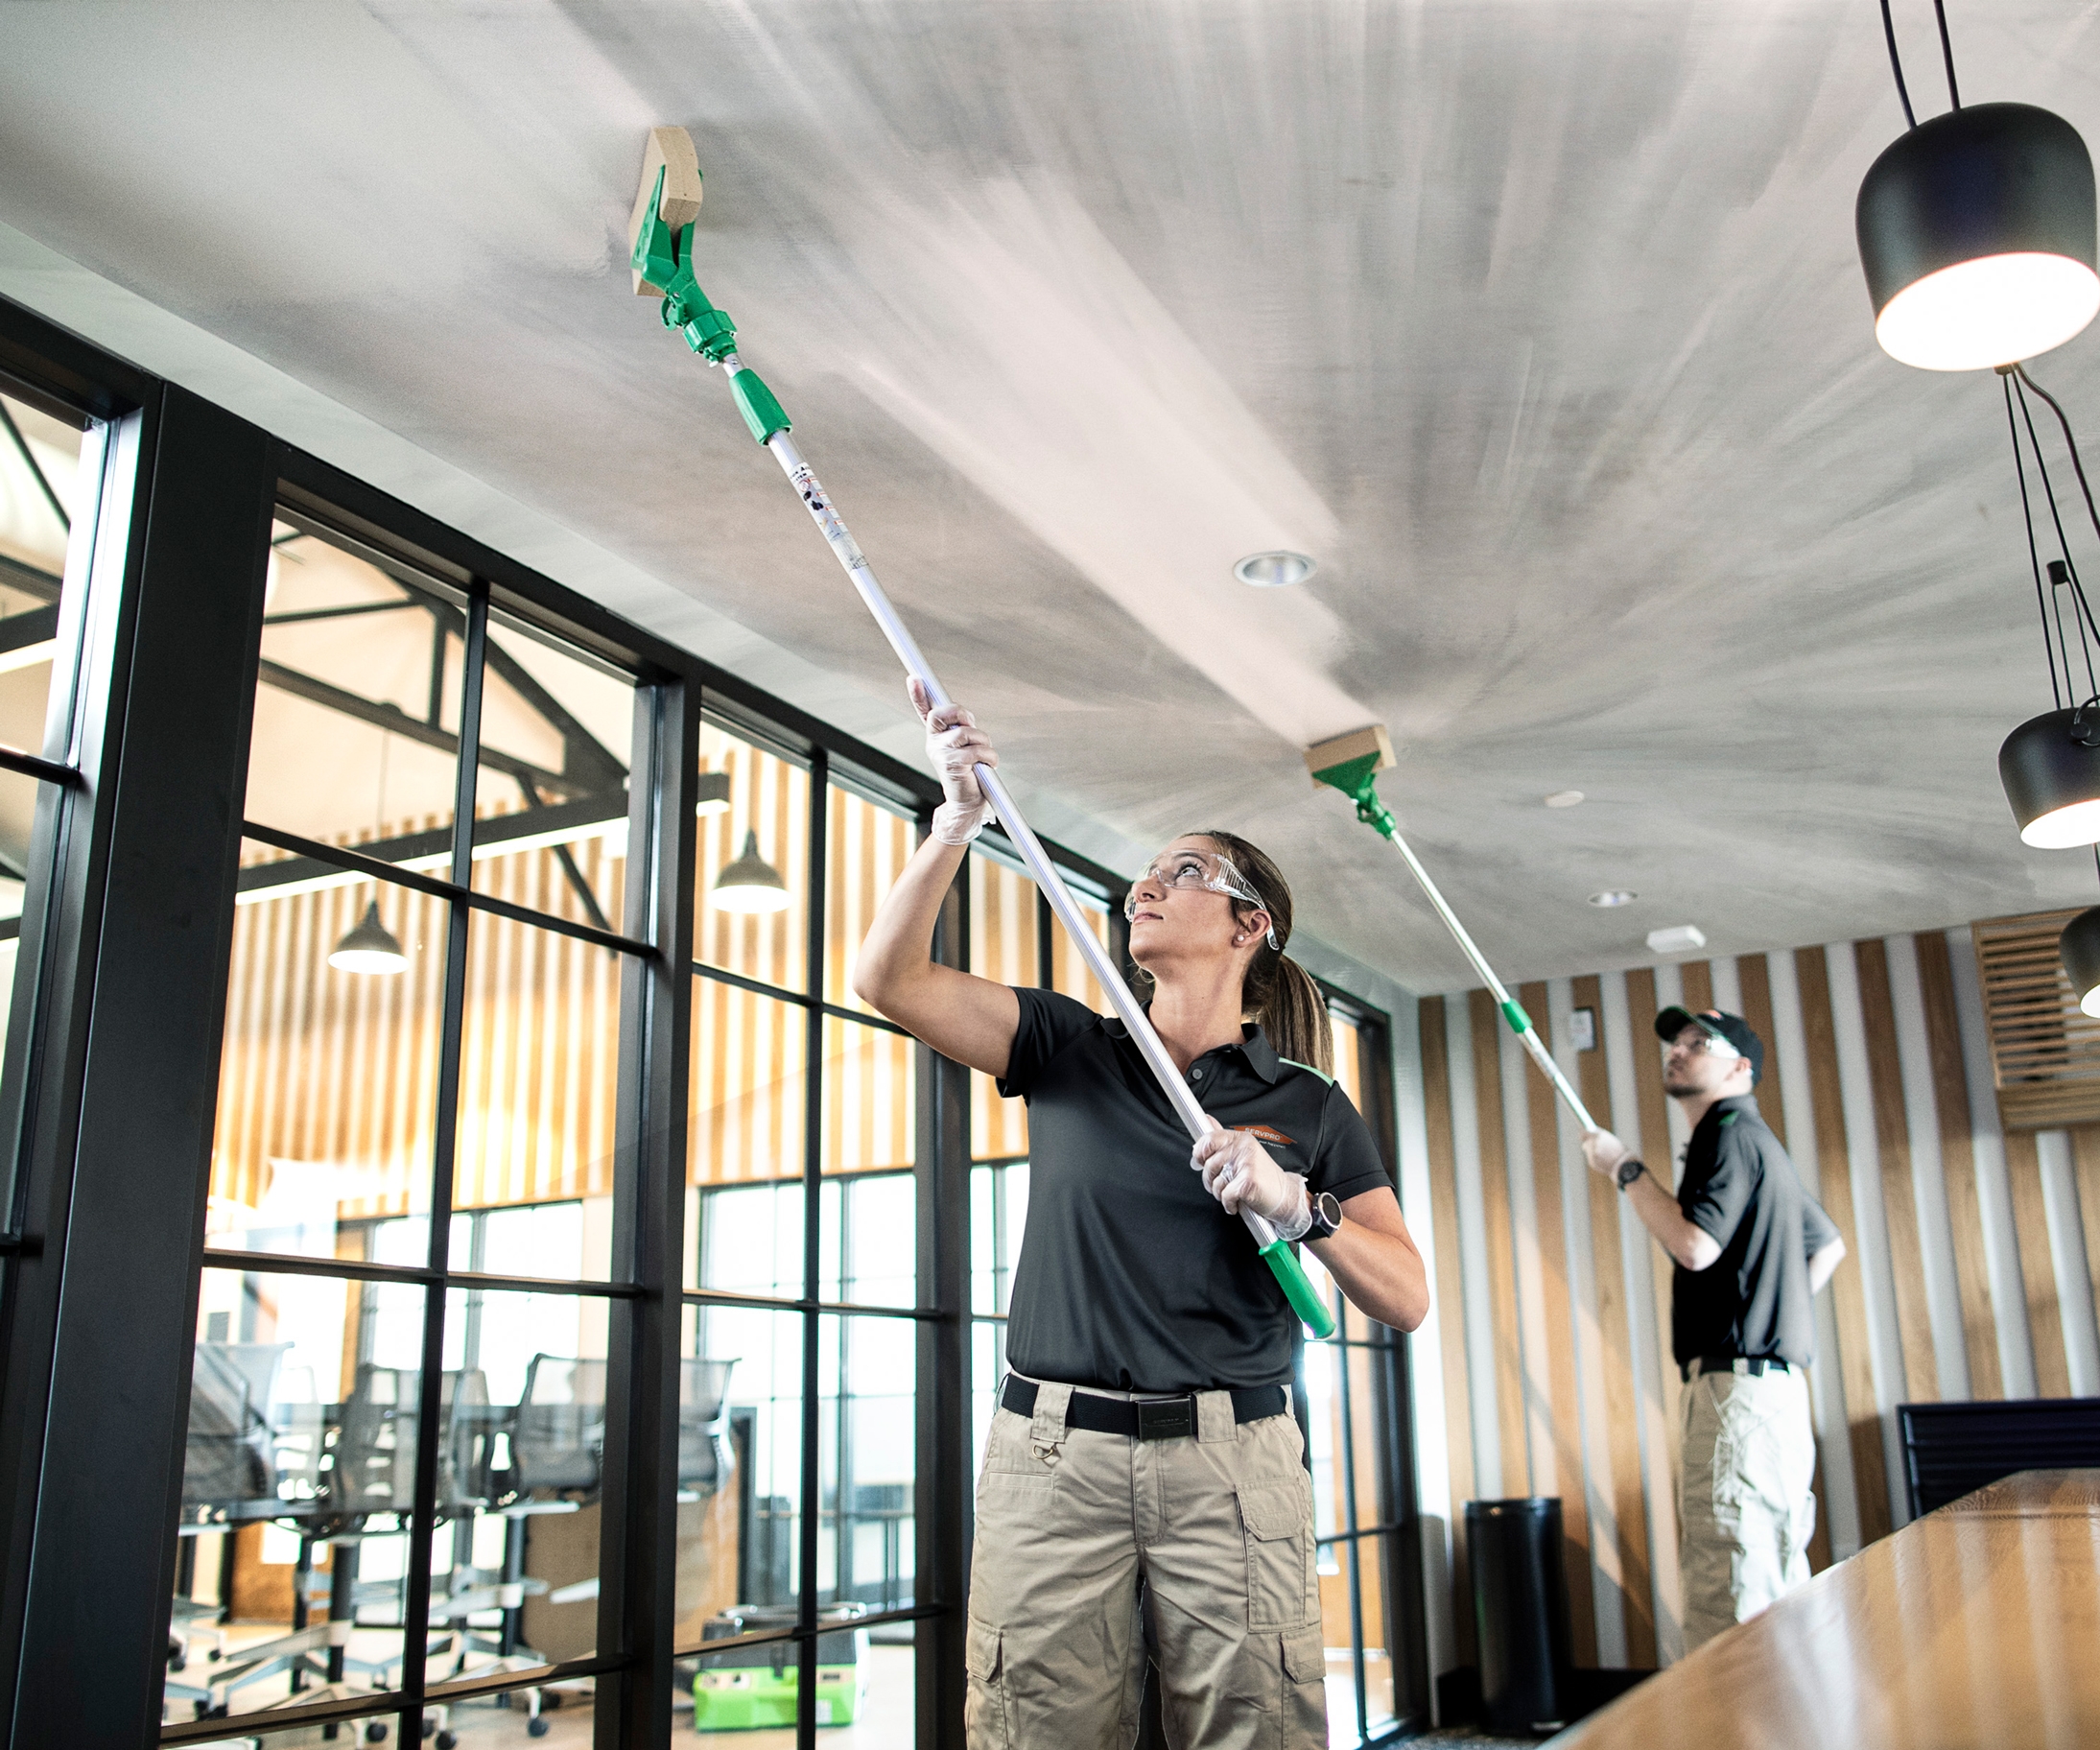 Janitorial Services In Richmond Hill